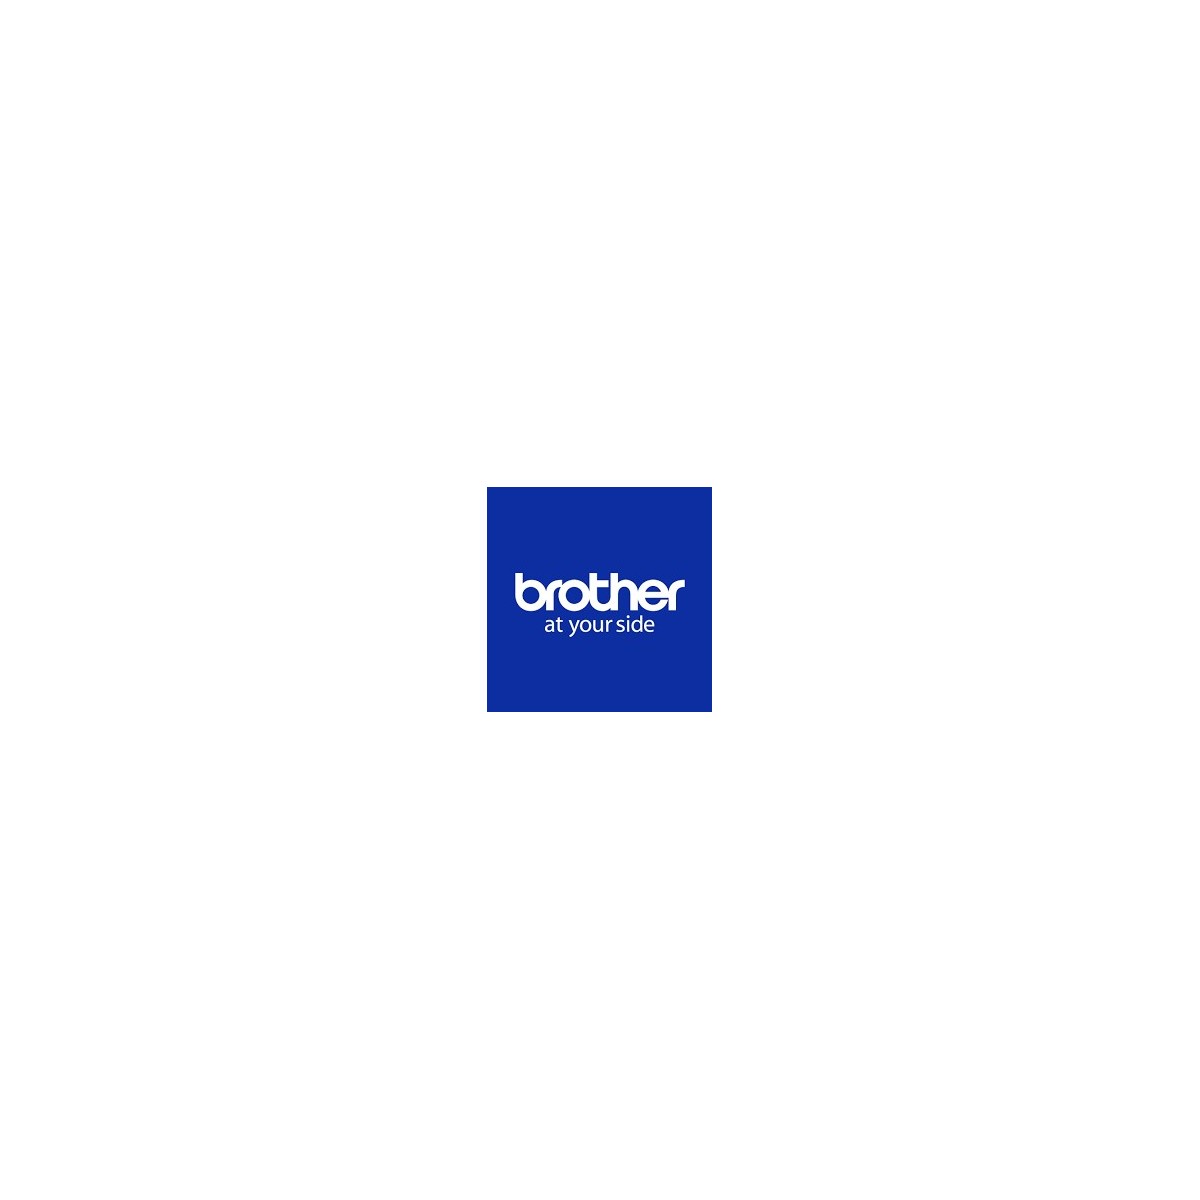 Brother Secure Print ADV Lizenz - Software - License only